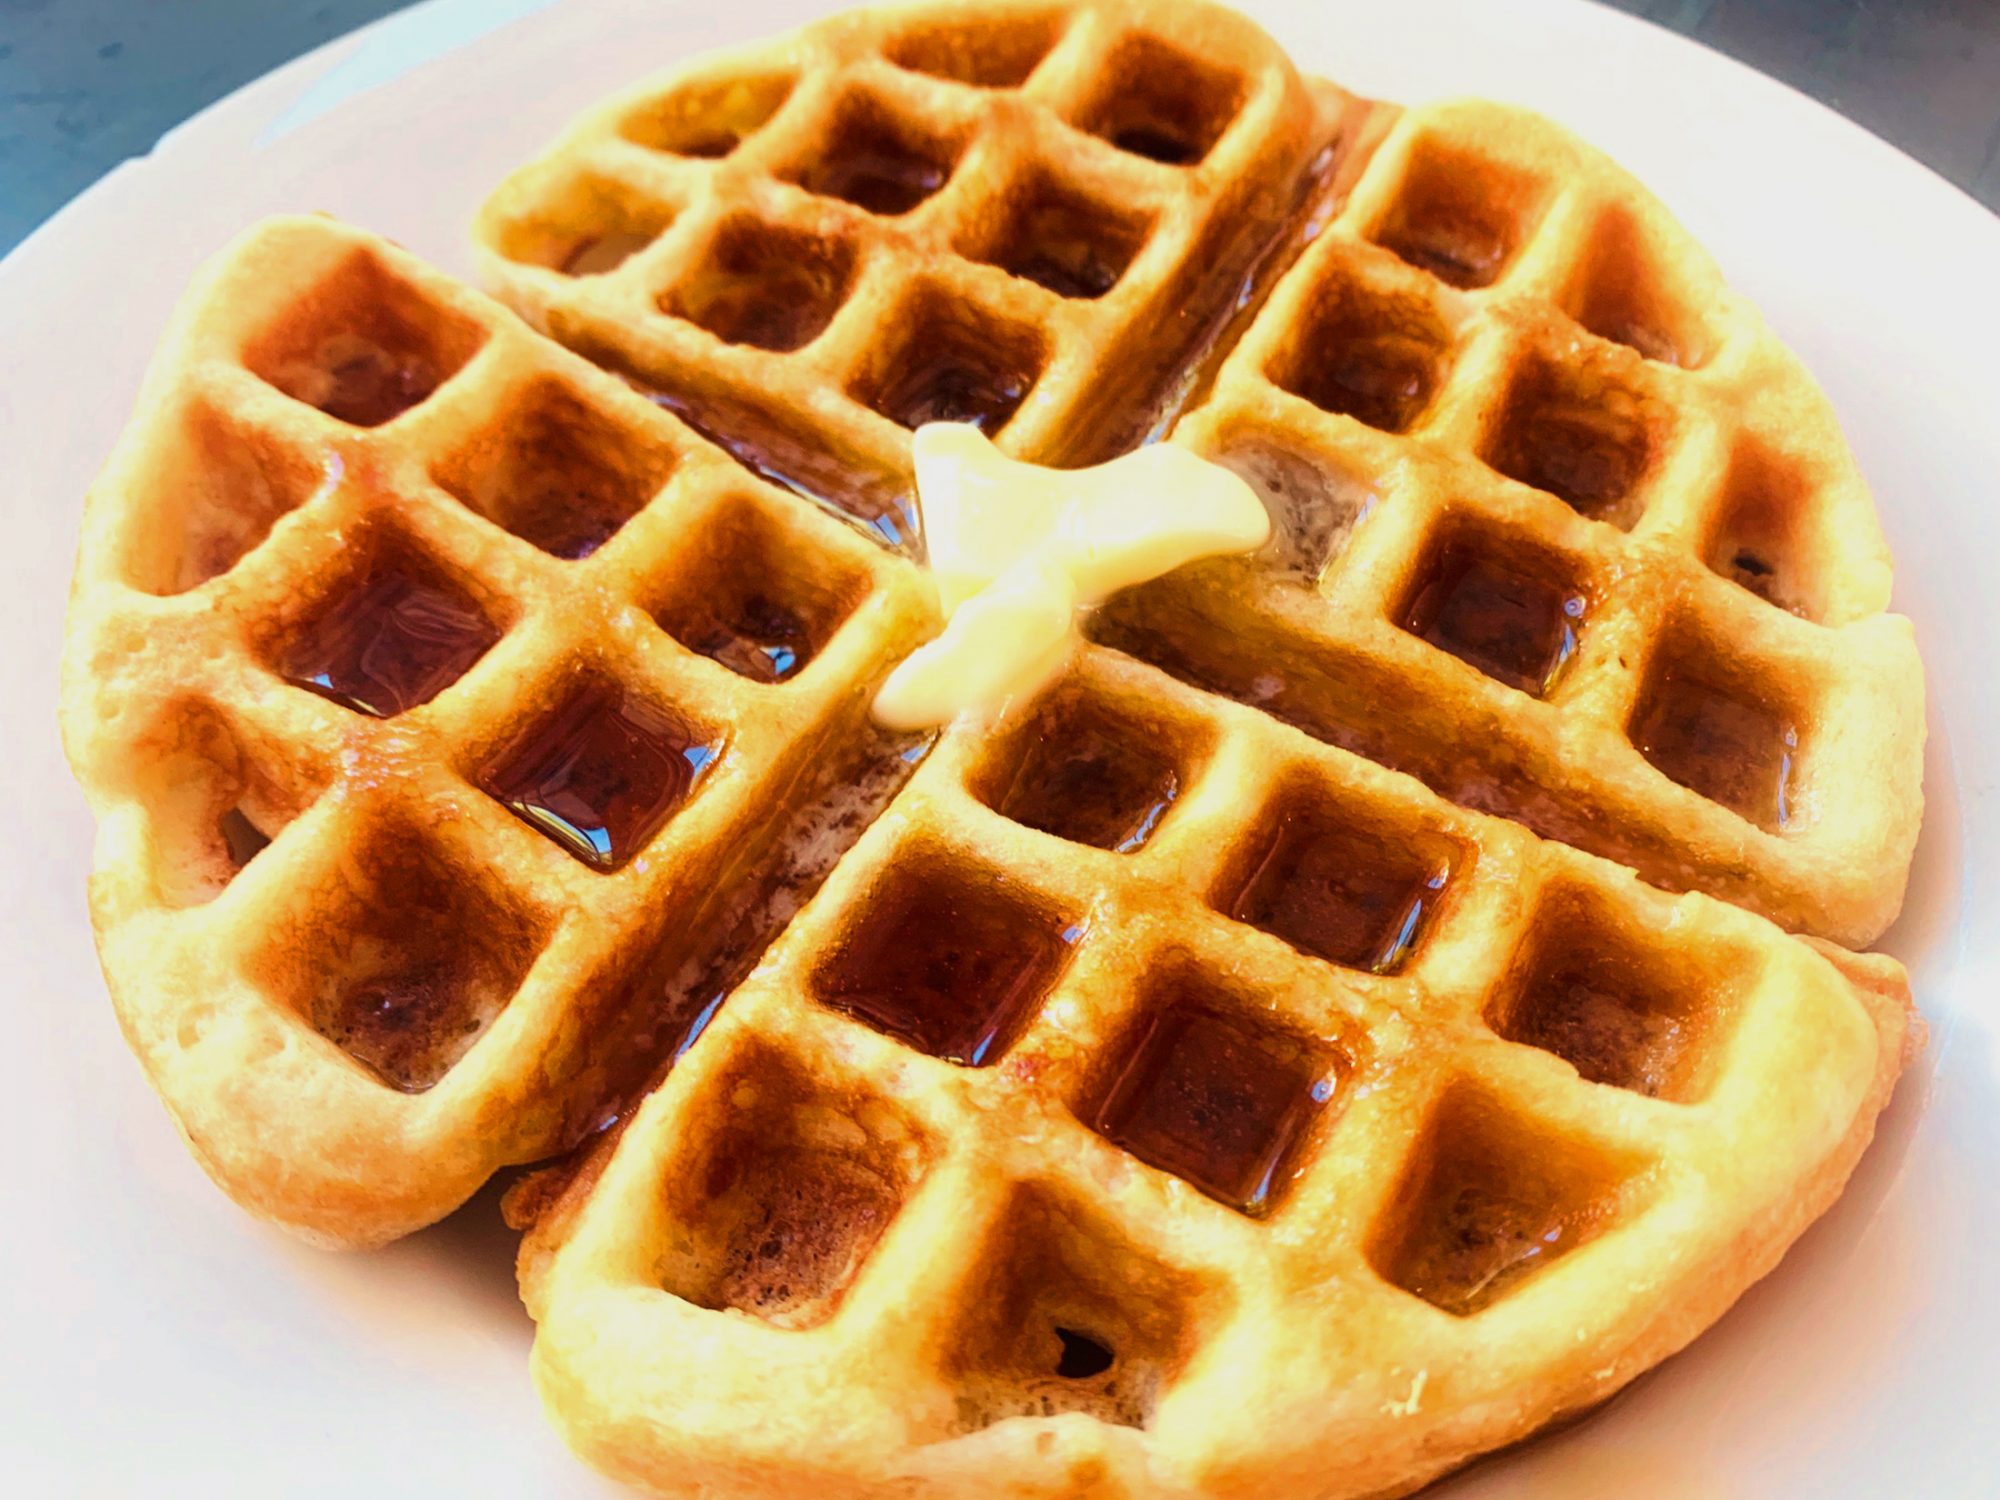 How many calories are in a Waffle House egg?